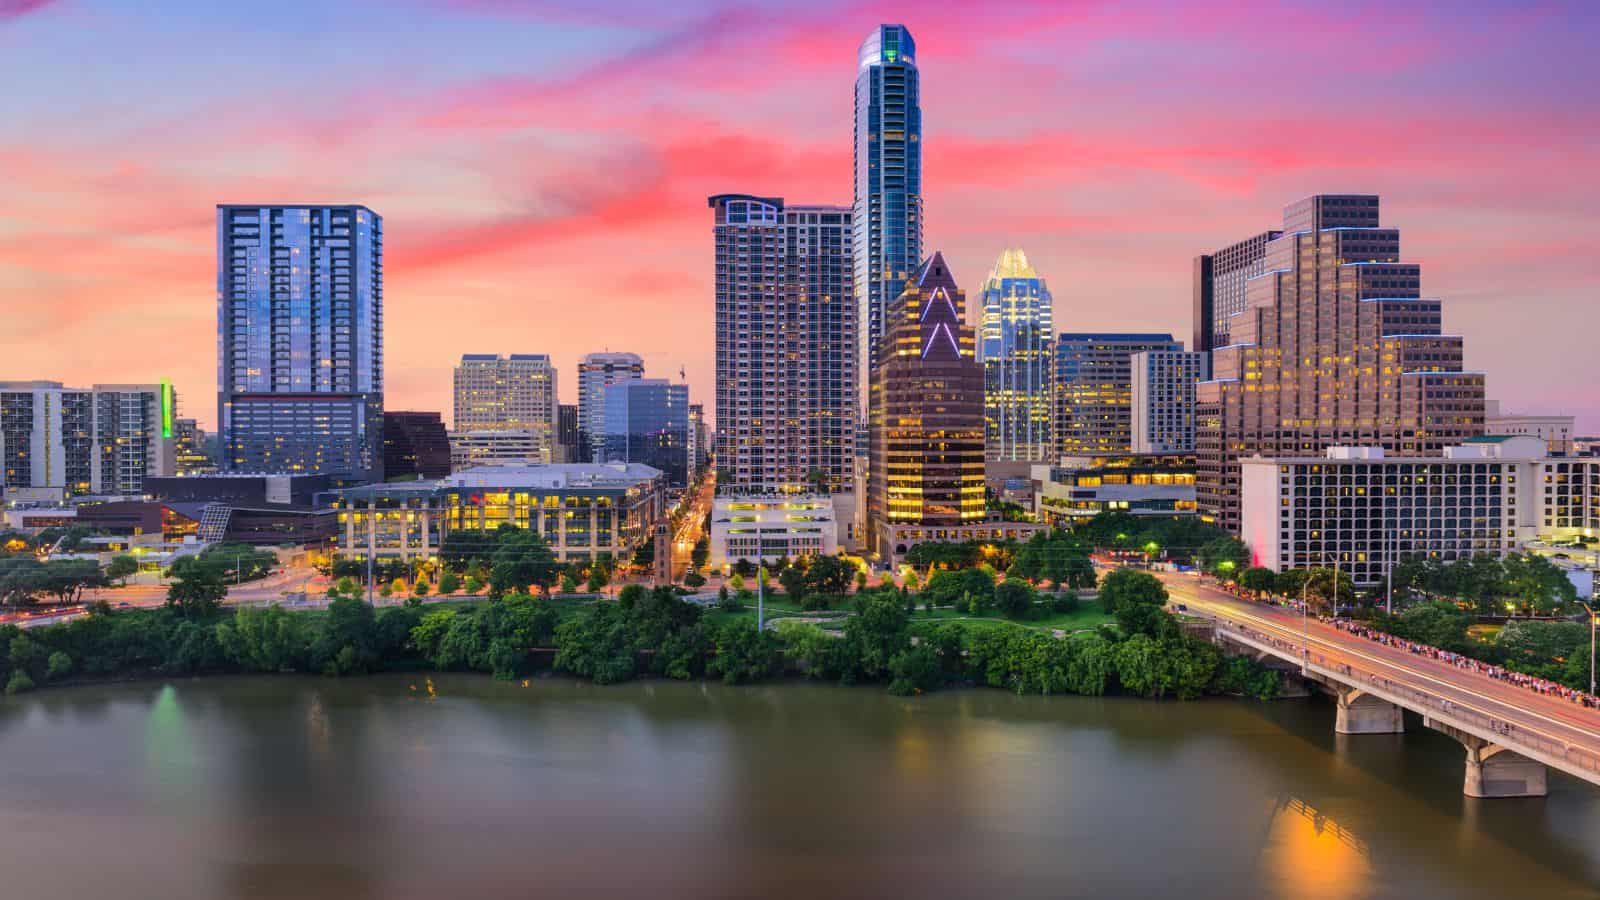 <p>If you’d prefer a livelier city then Austin has a vibrant music scene and great food culture. It has a warm climate and a friendly community. There will be plenty for you to do in Austin, so if you see retirement as being a time to try new things then head here.</p>